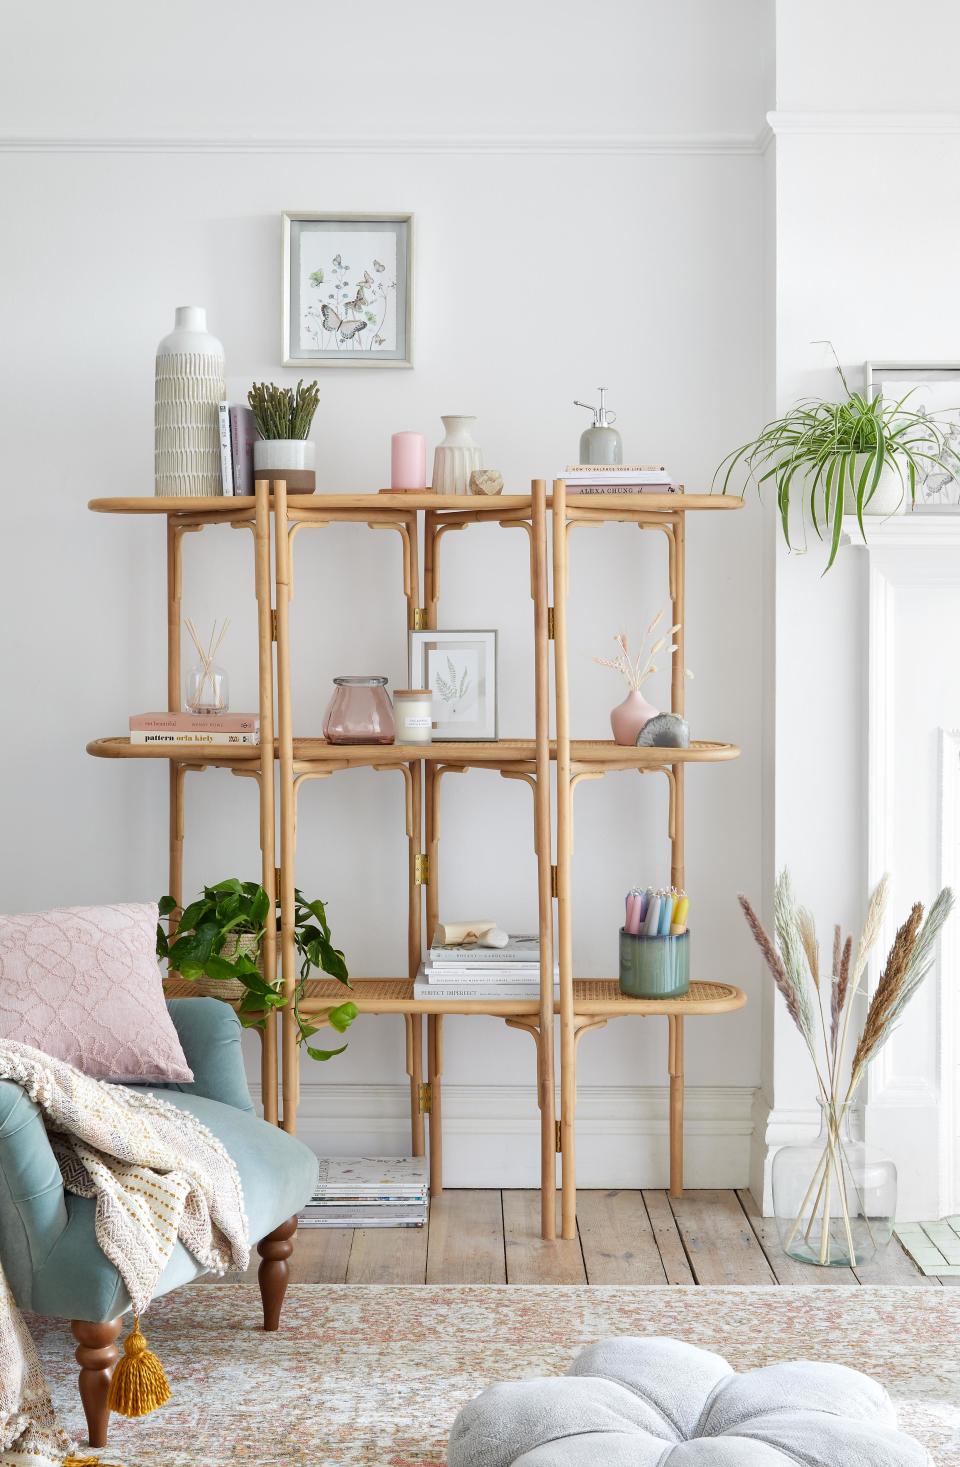 6. And choose boho shelving for your living room